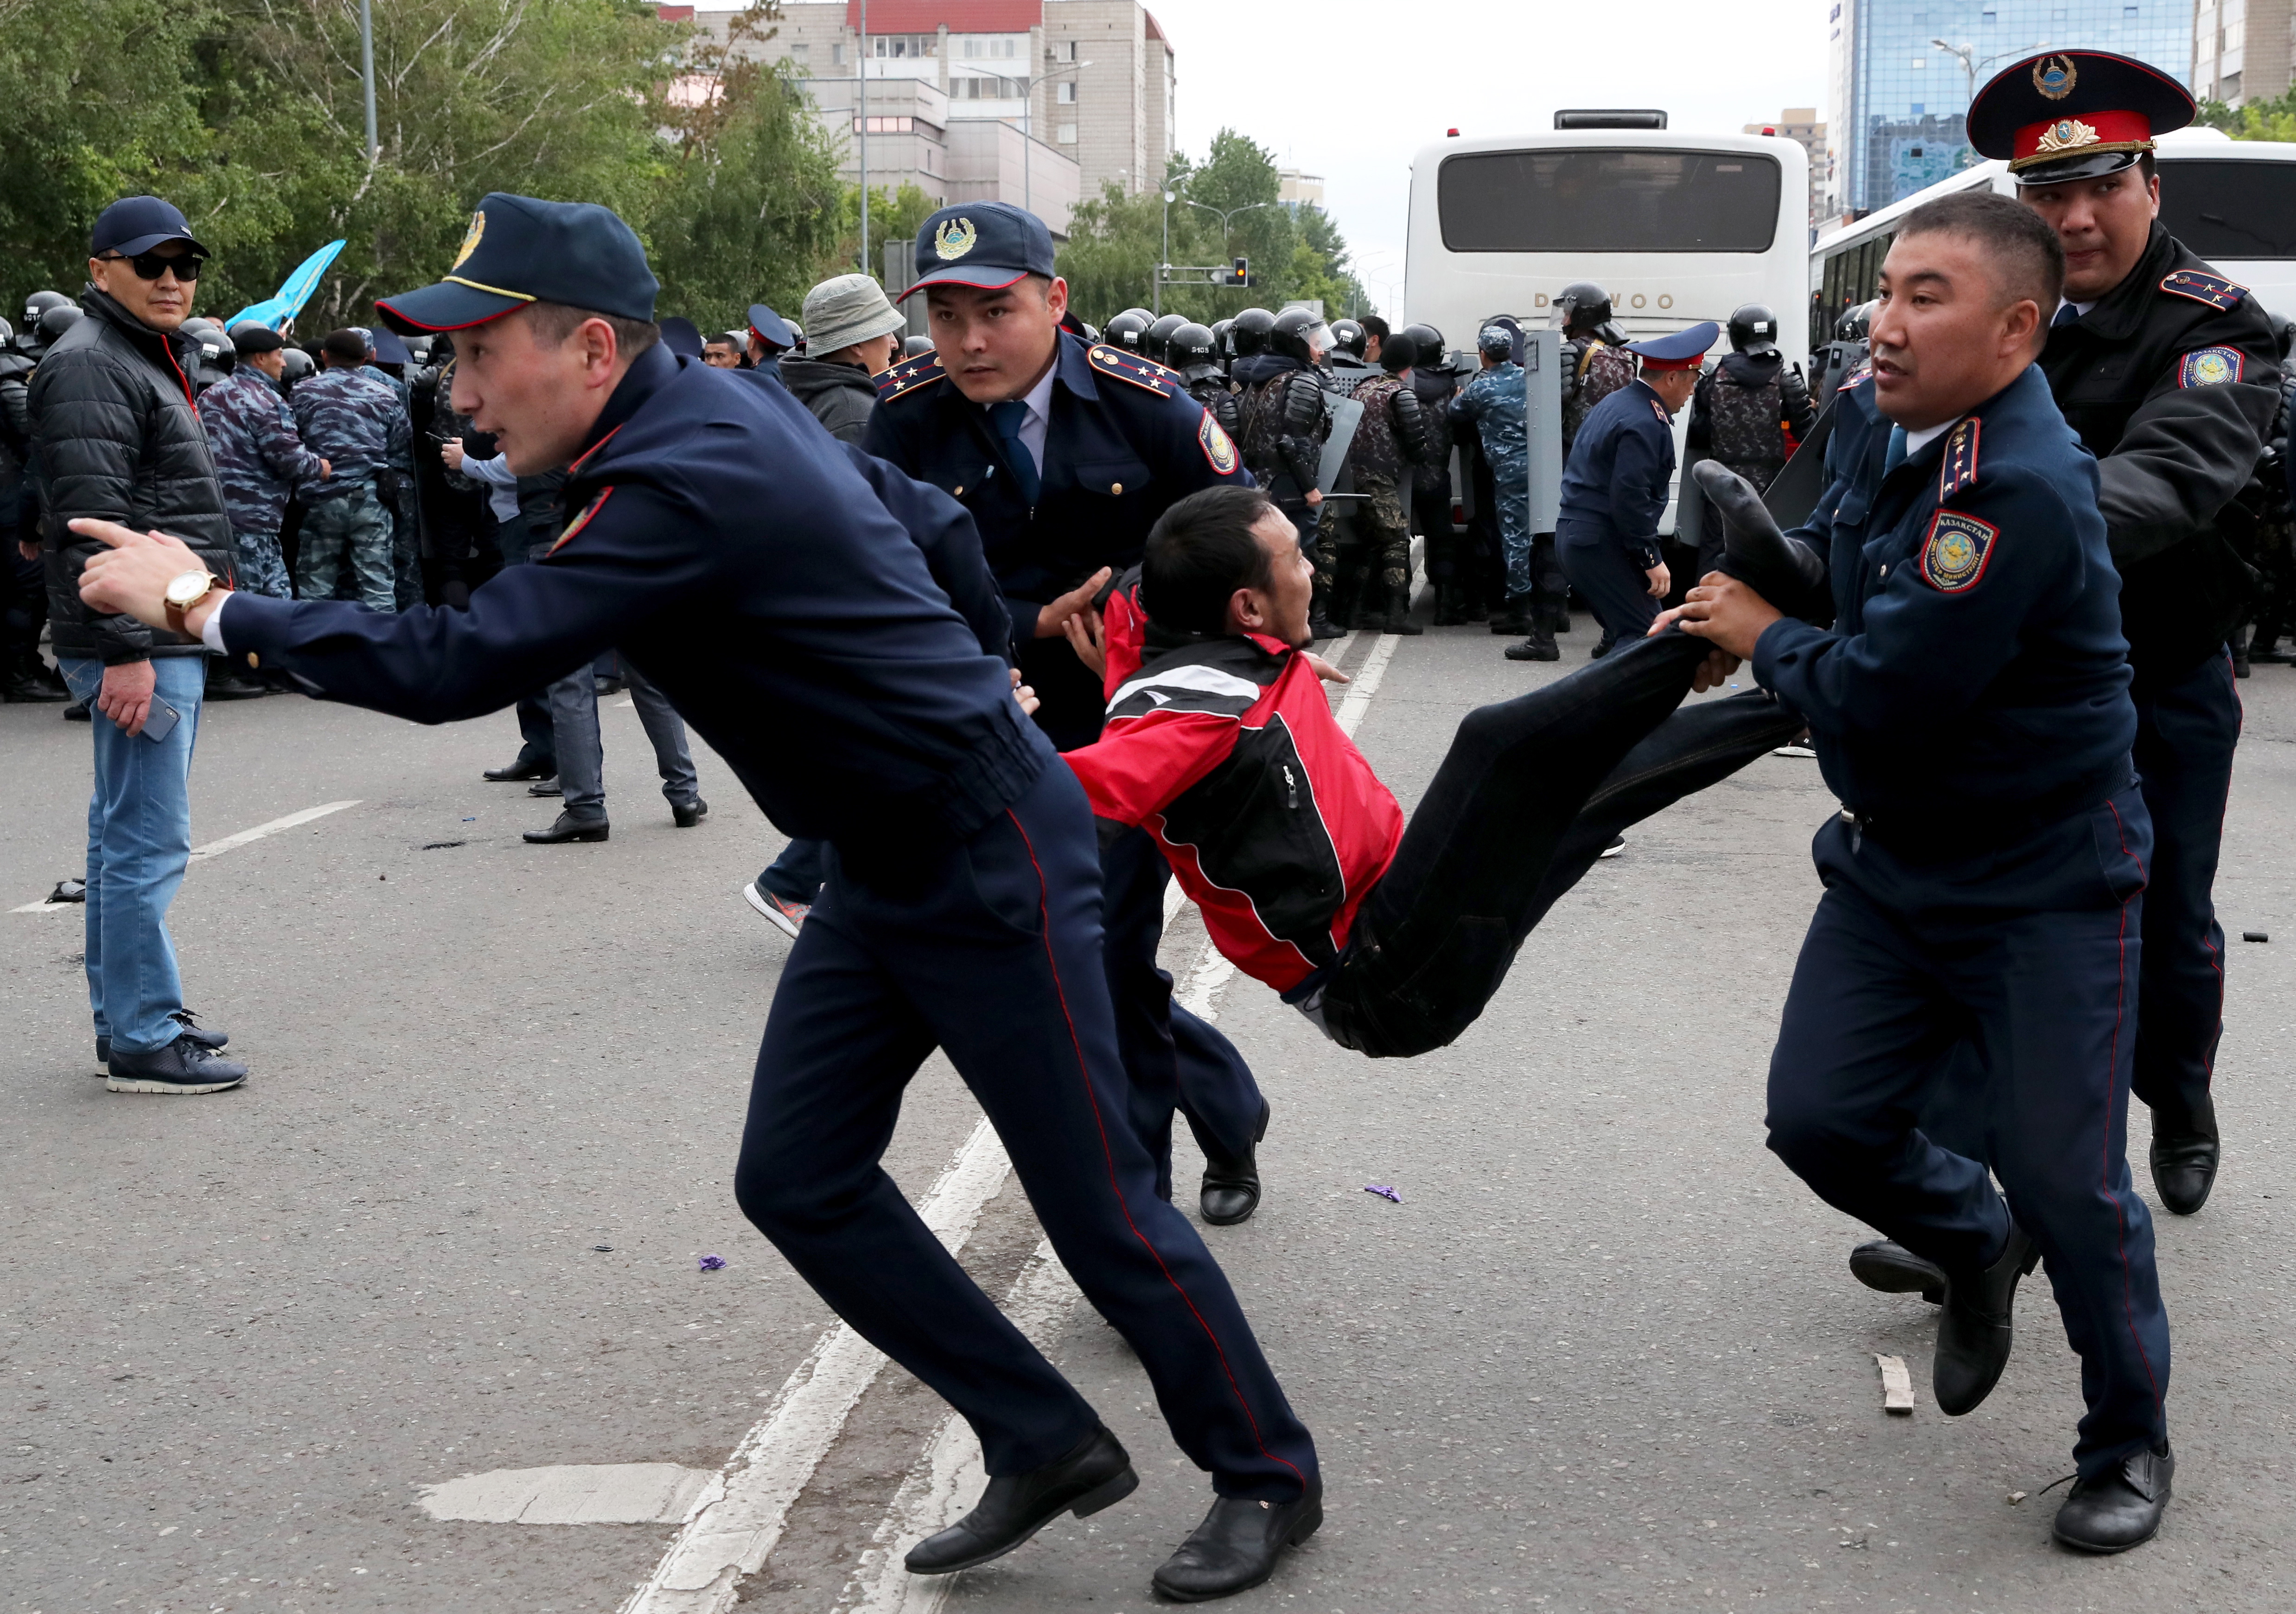 epa07636650 Police detain opposition supporters during a protest calling for free and fair elections during the presidential elections in Nur-Sultan (formerly known as Astana), Kazakhstan, 09 June 2019.  EPA/IGOR KOVALENKO